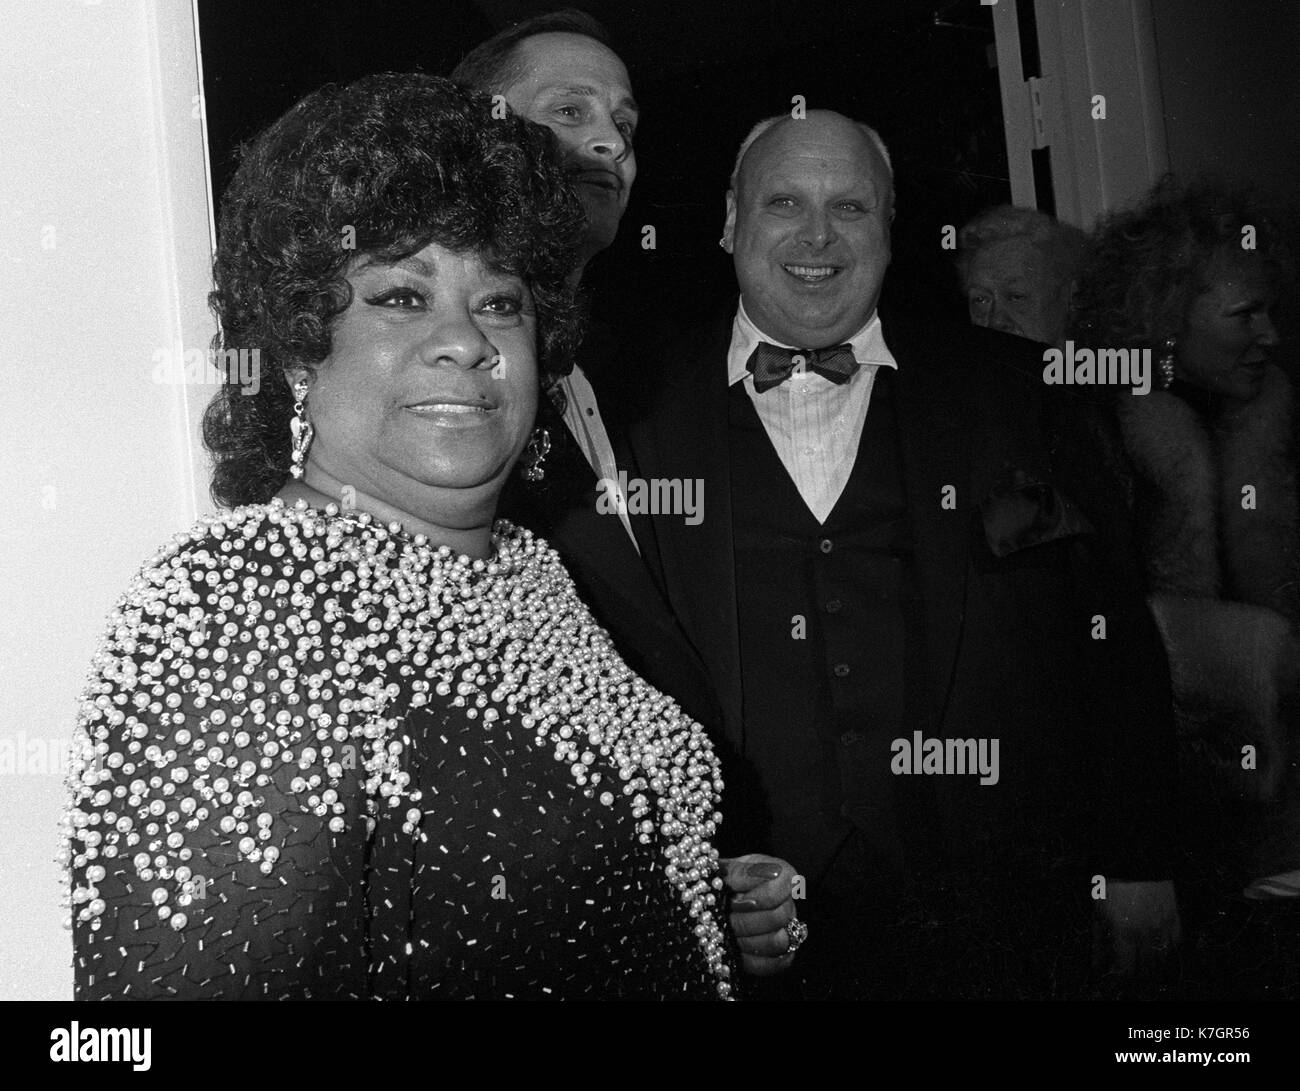 Baltimore, MD February 16, 1988 Singer, Ruth Carter appears with  Divine (Harris Glen Milstead) on the far right wth director, John Waters in the middle, at the premiere of the orginial movie, 'Hairspray'  Divine died six weeks after the premiere.  Credit: Patsy Lynch/MediaPunch Stock Photo